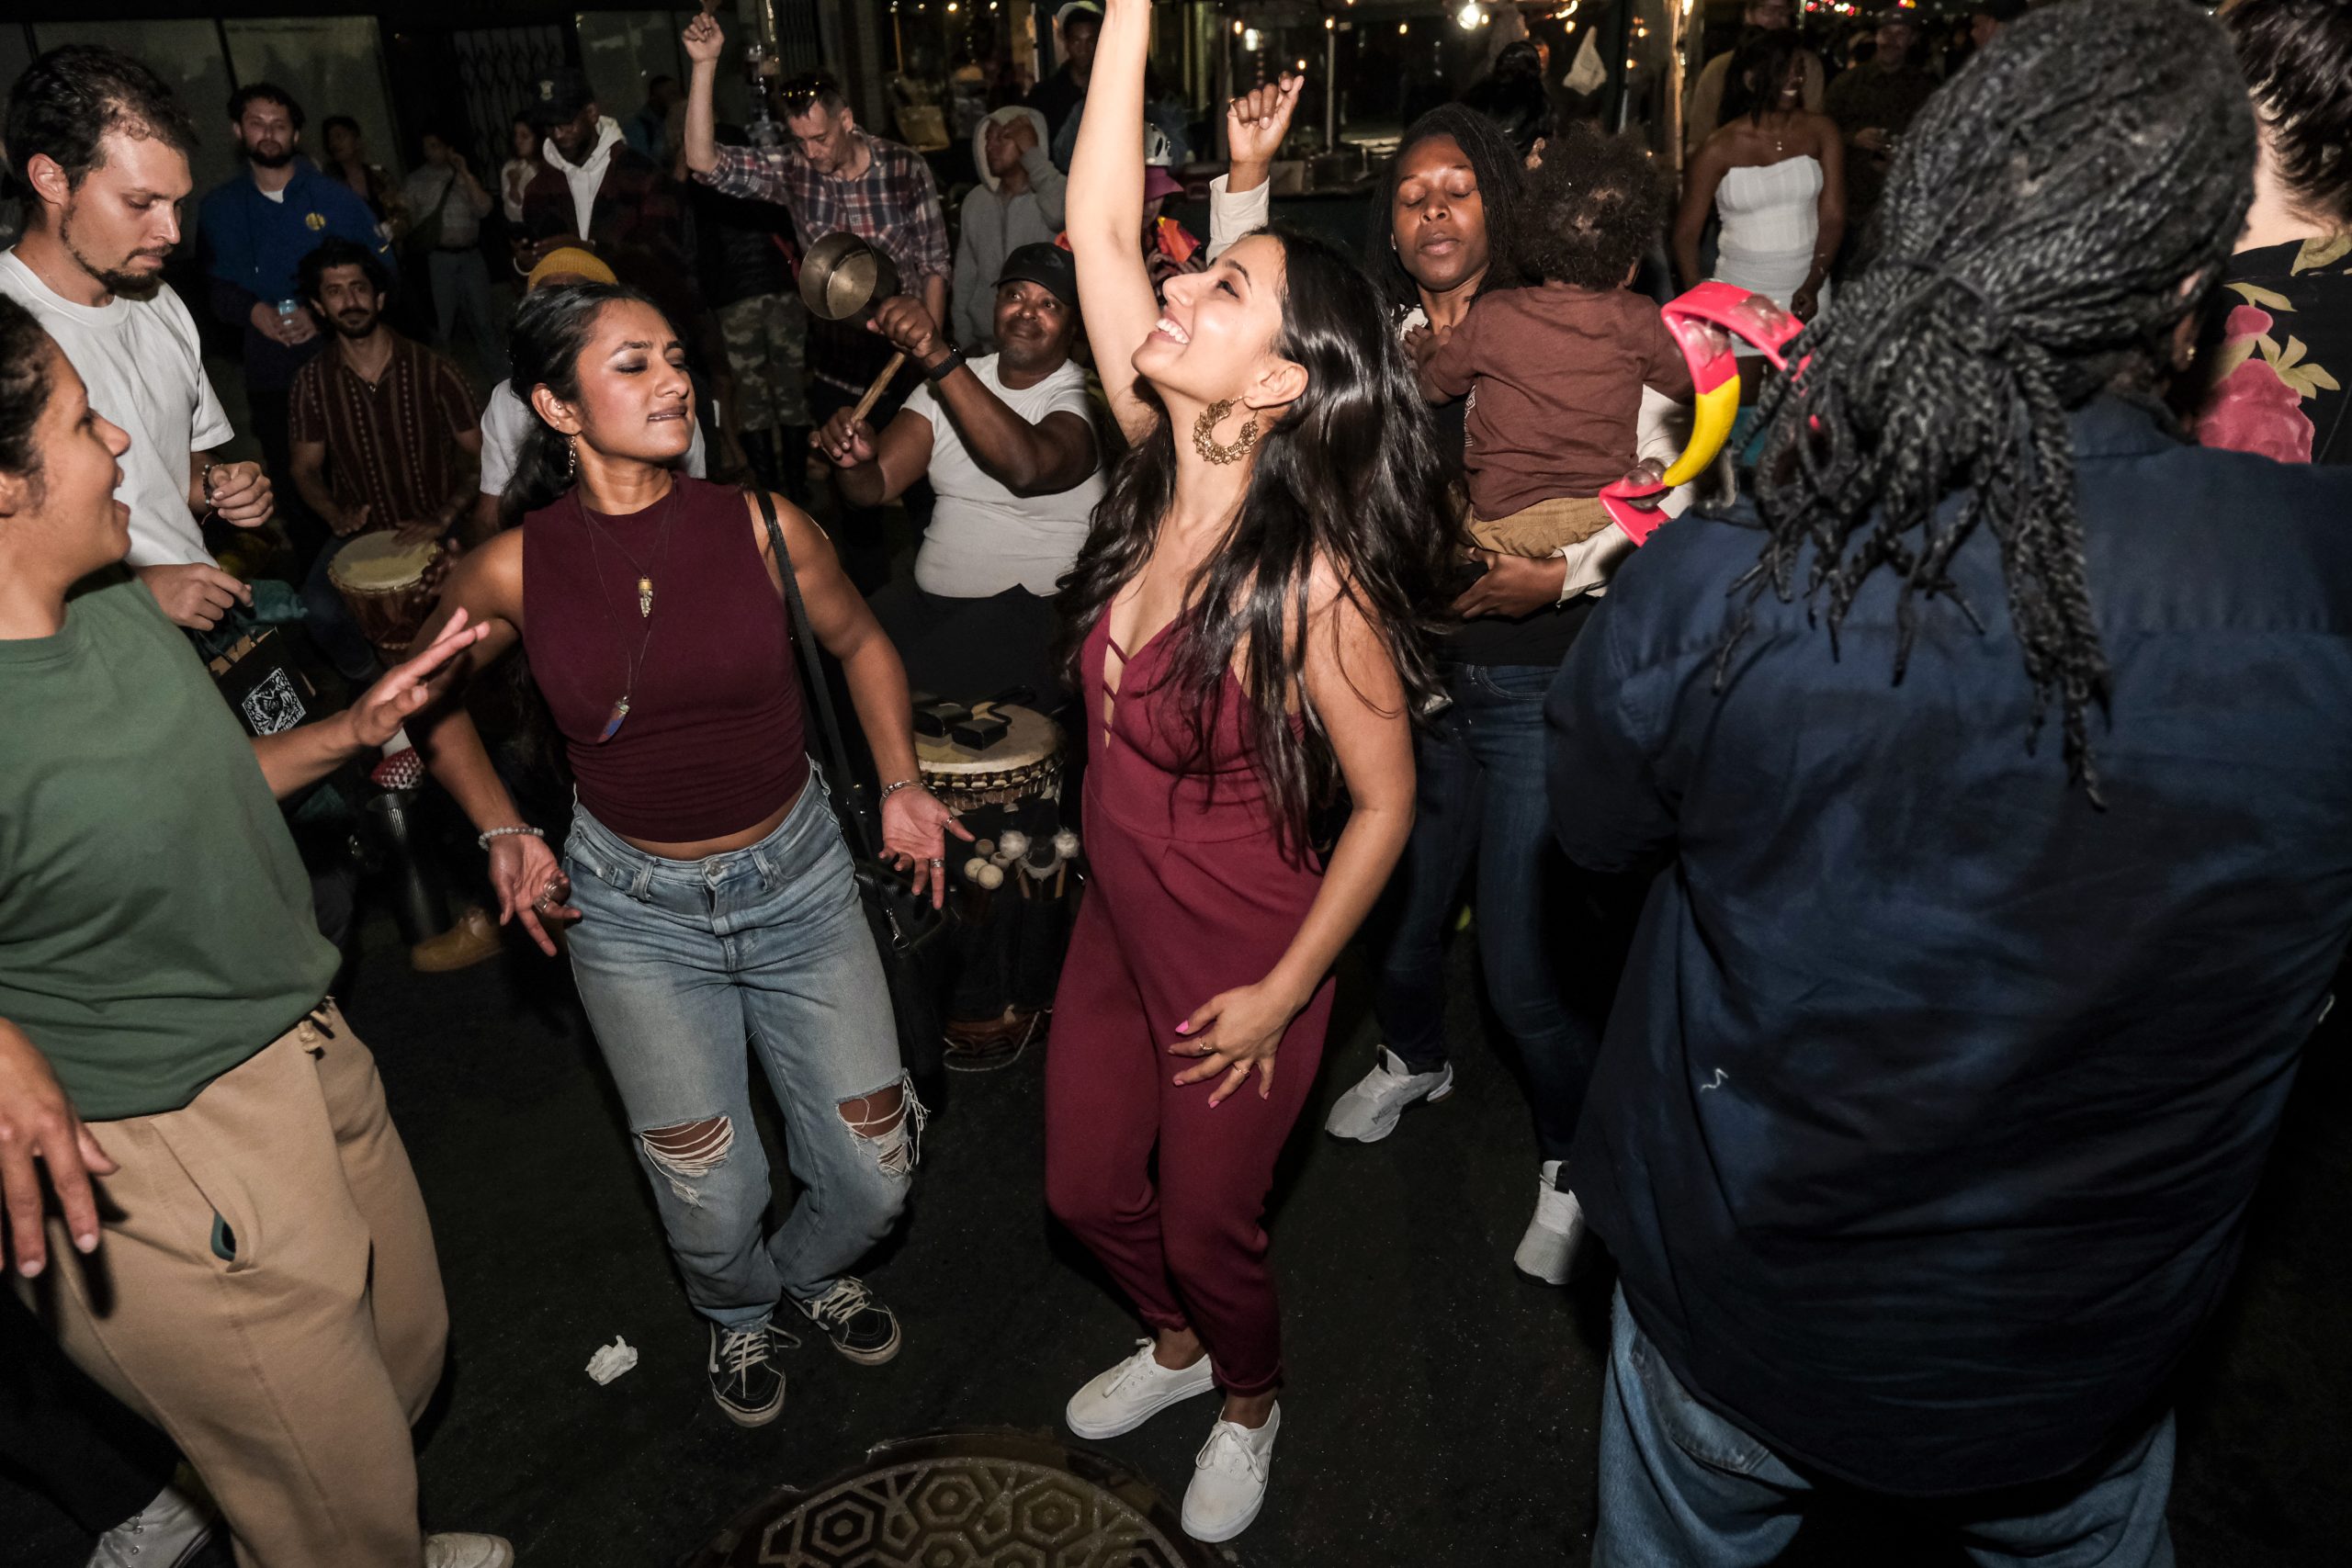 This week in Oakland: First Fridays is back, and DJ Black Coffee at Frank Ogawa Plaza